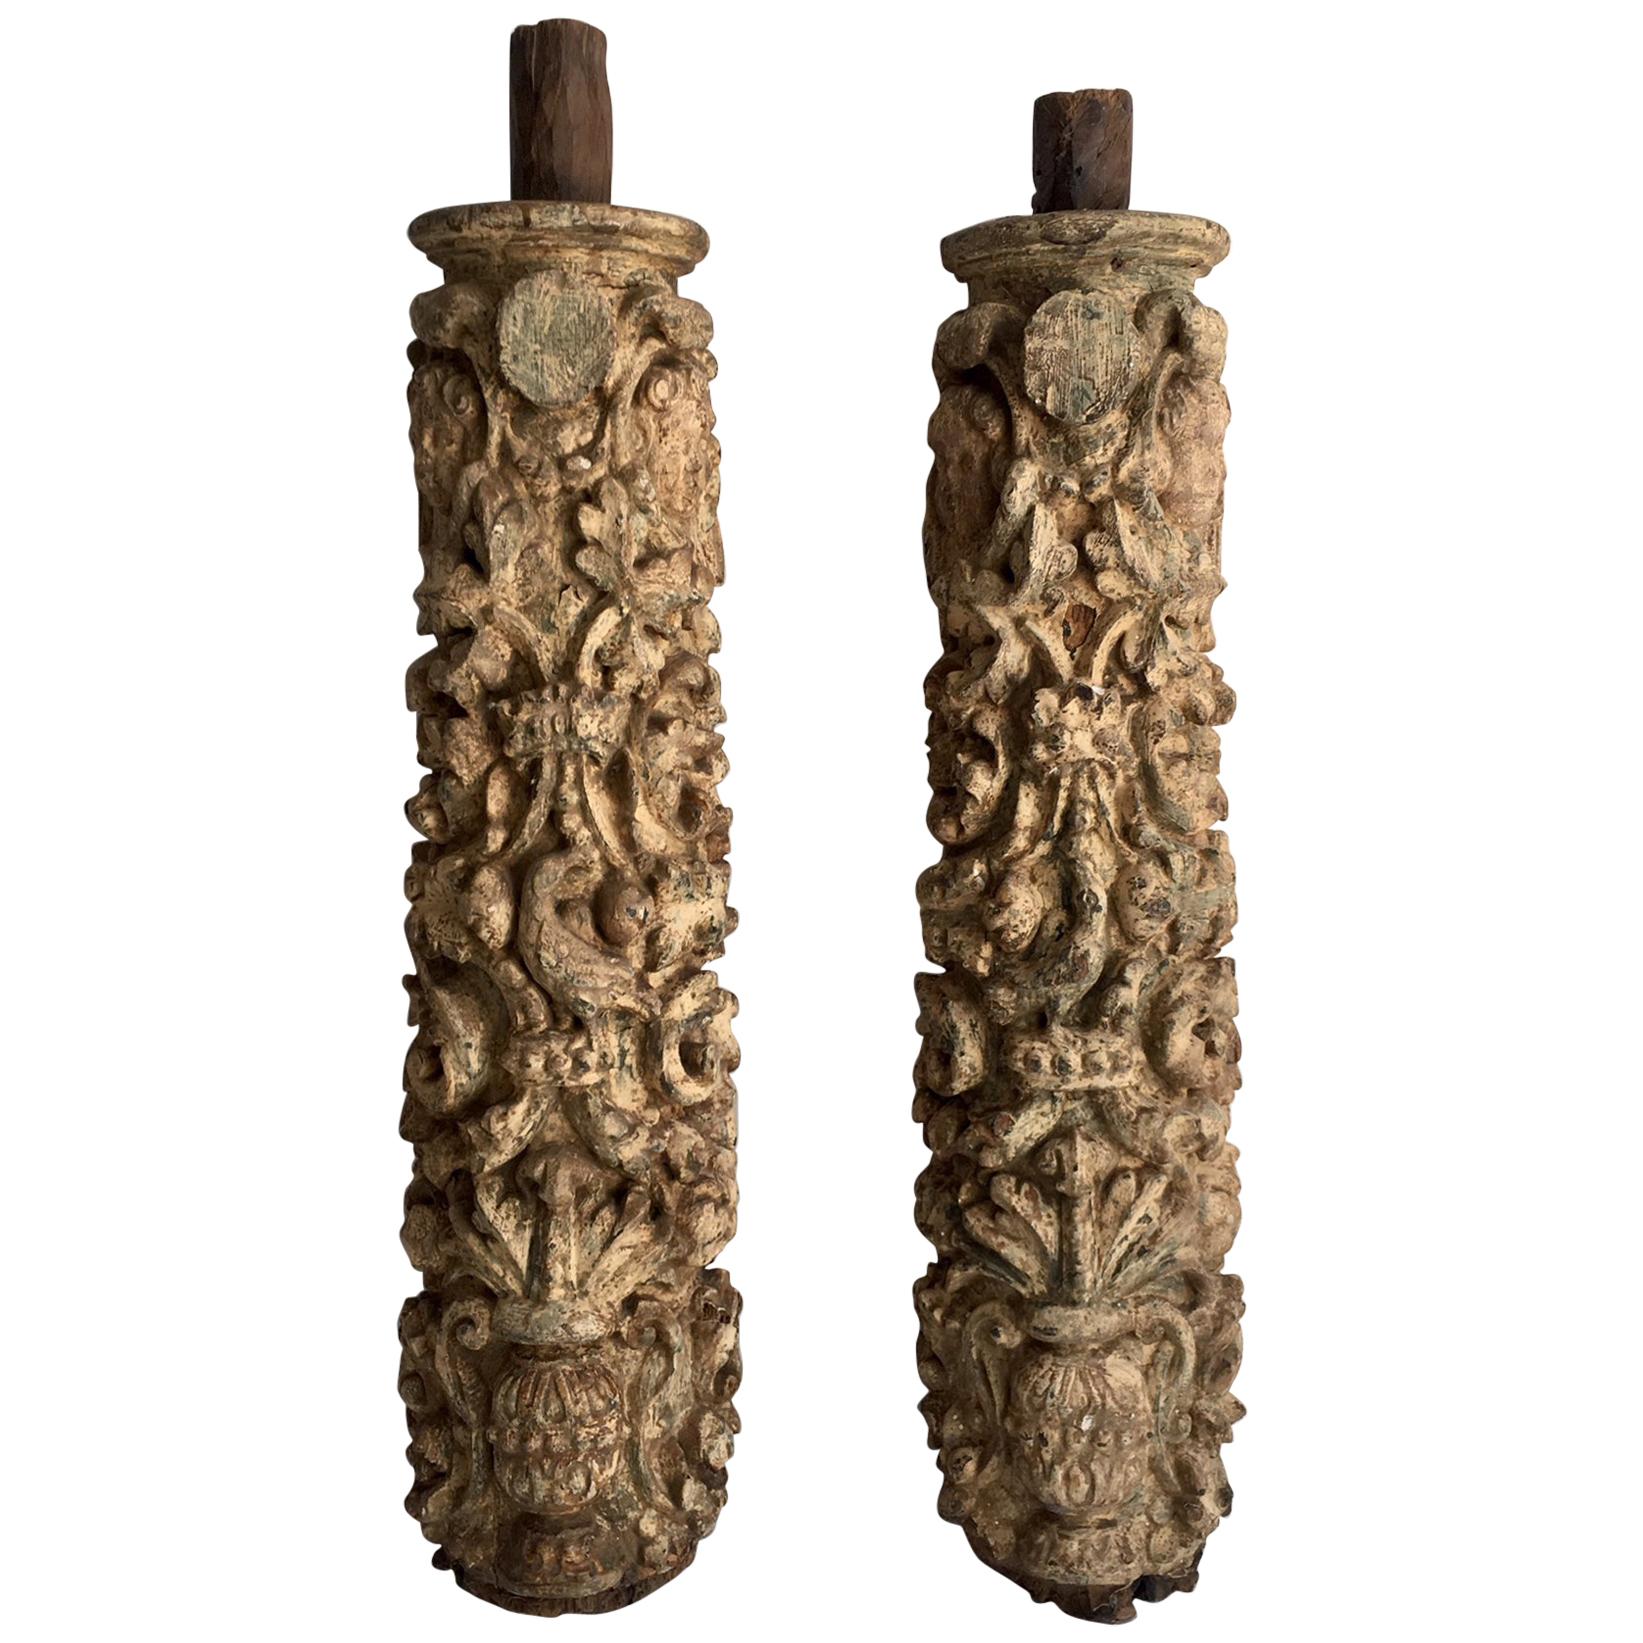 Pair of 17th Century Carved and Polychromed Portuguese Columns